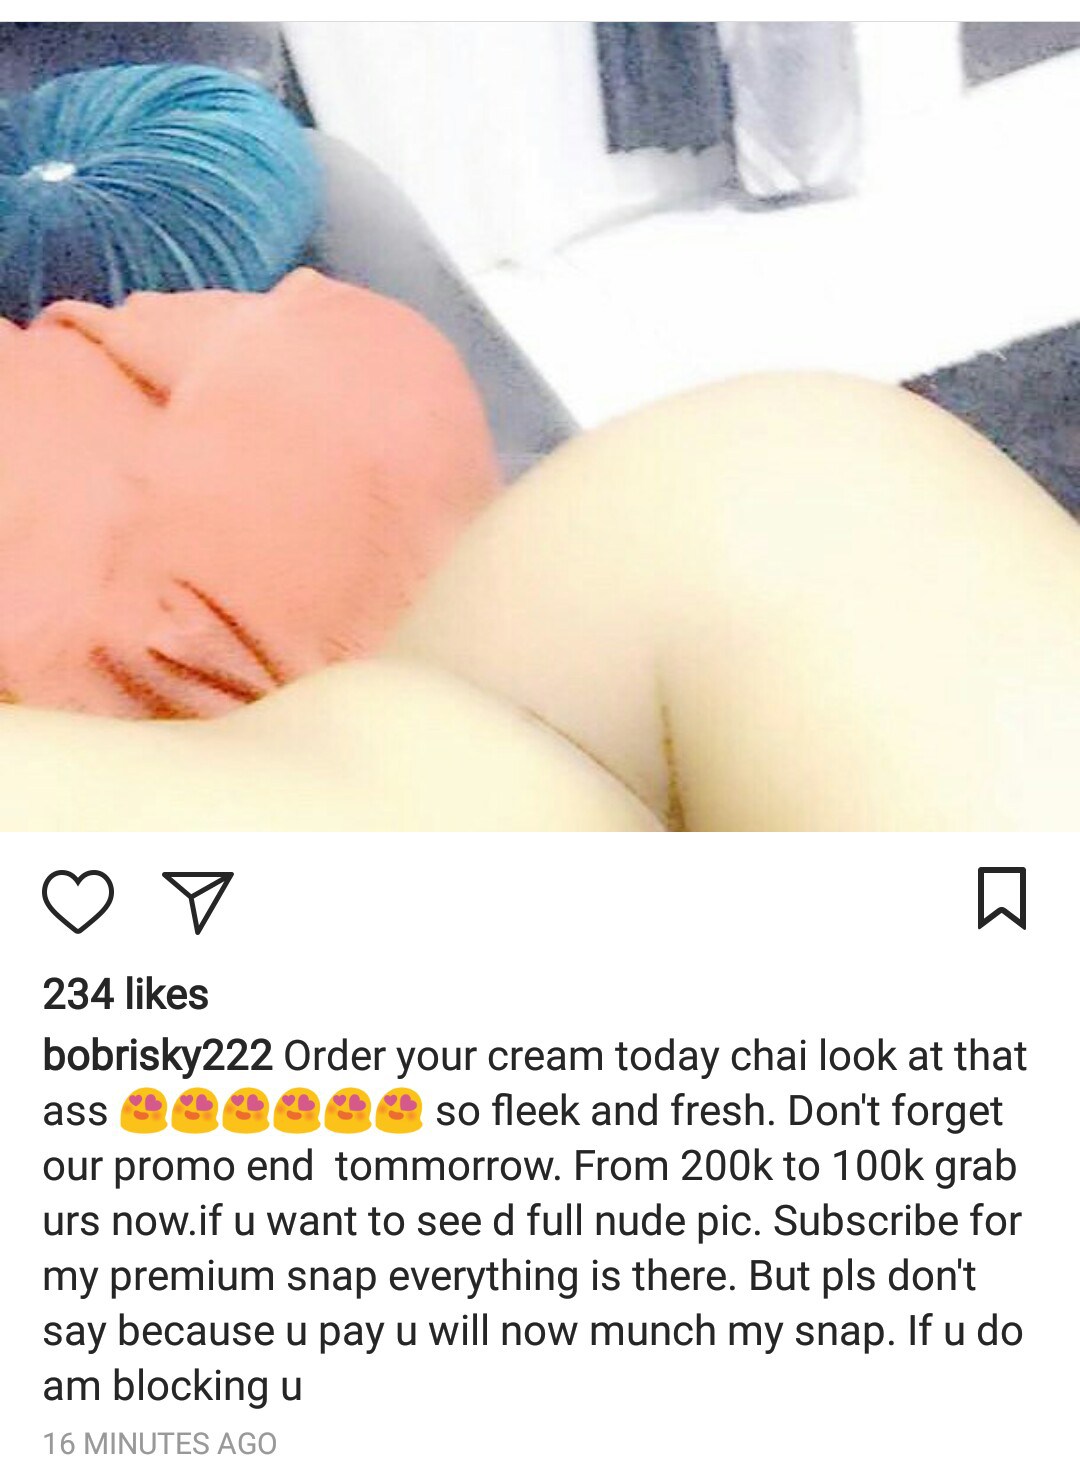 Bobrisky Shares Unclad Photo Of His Ass, Finally Goes N-Ude